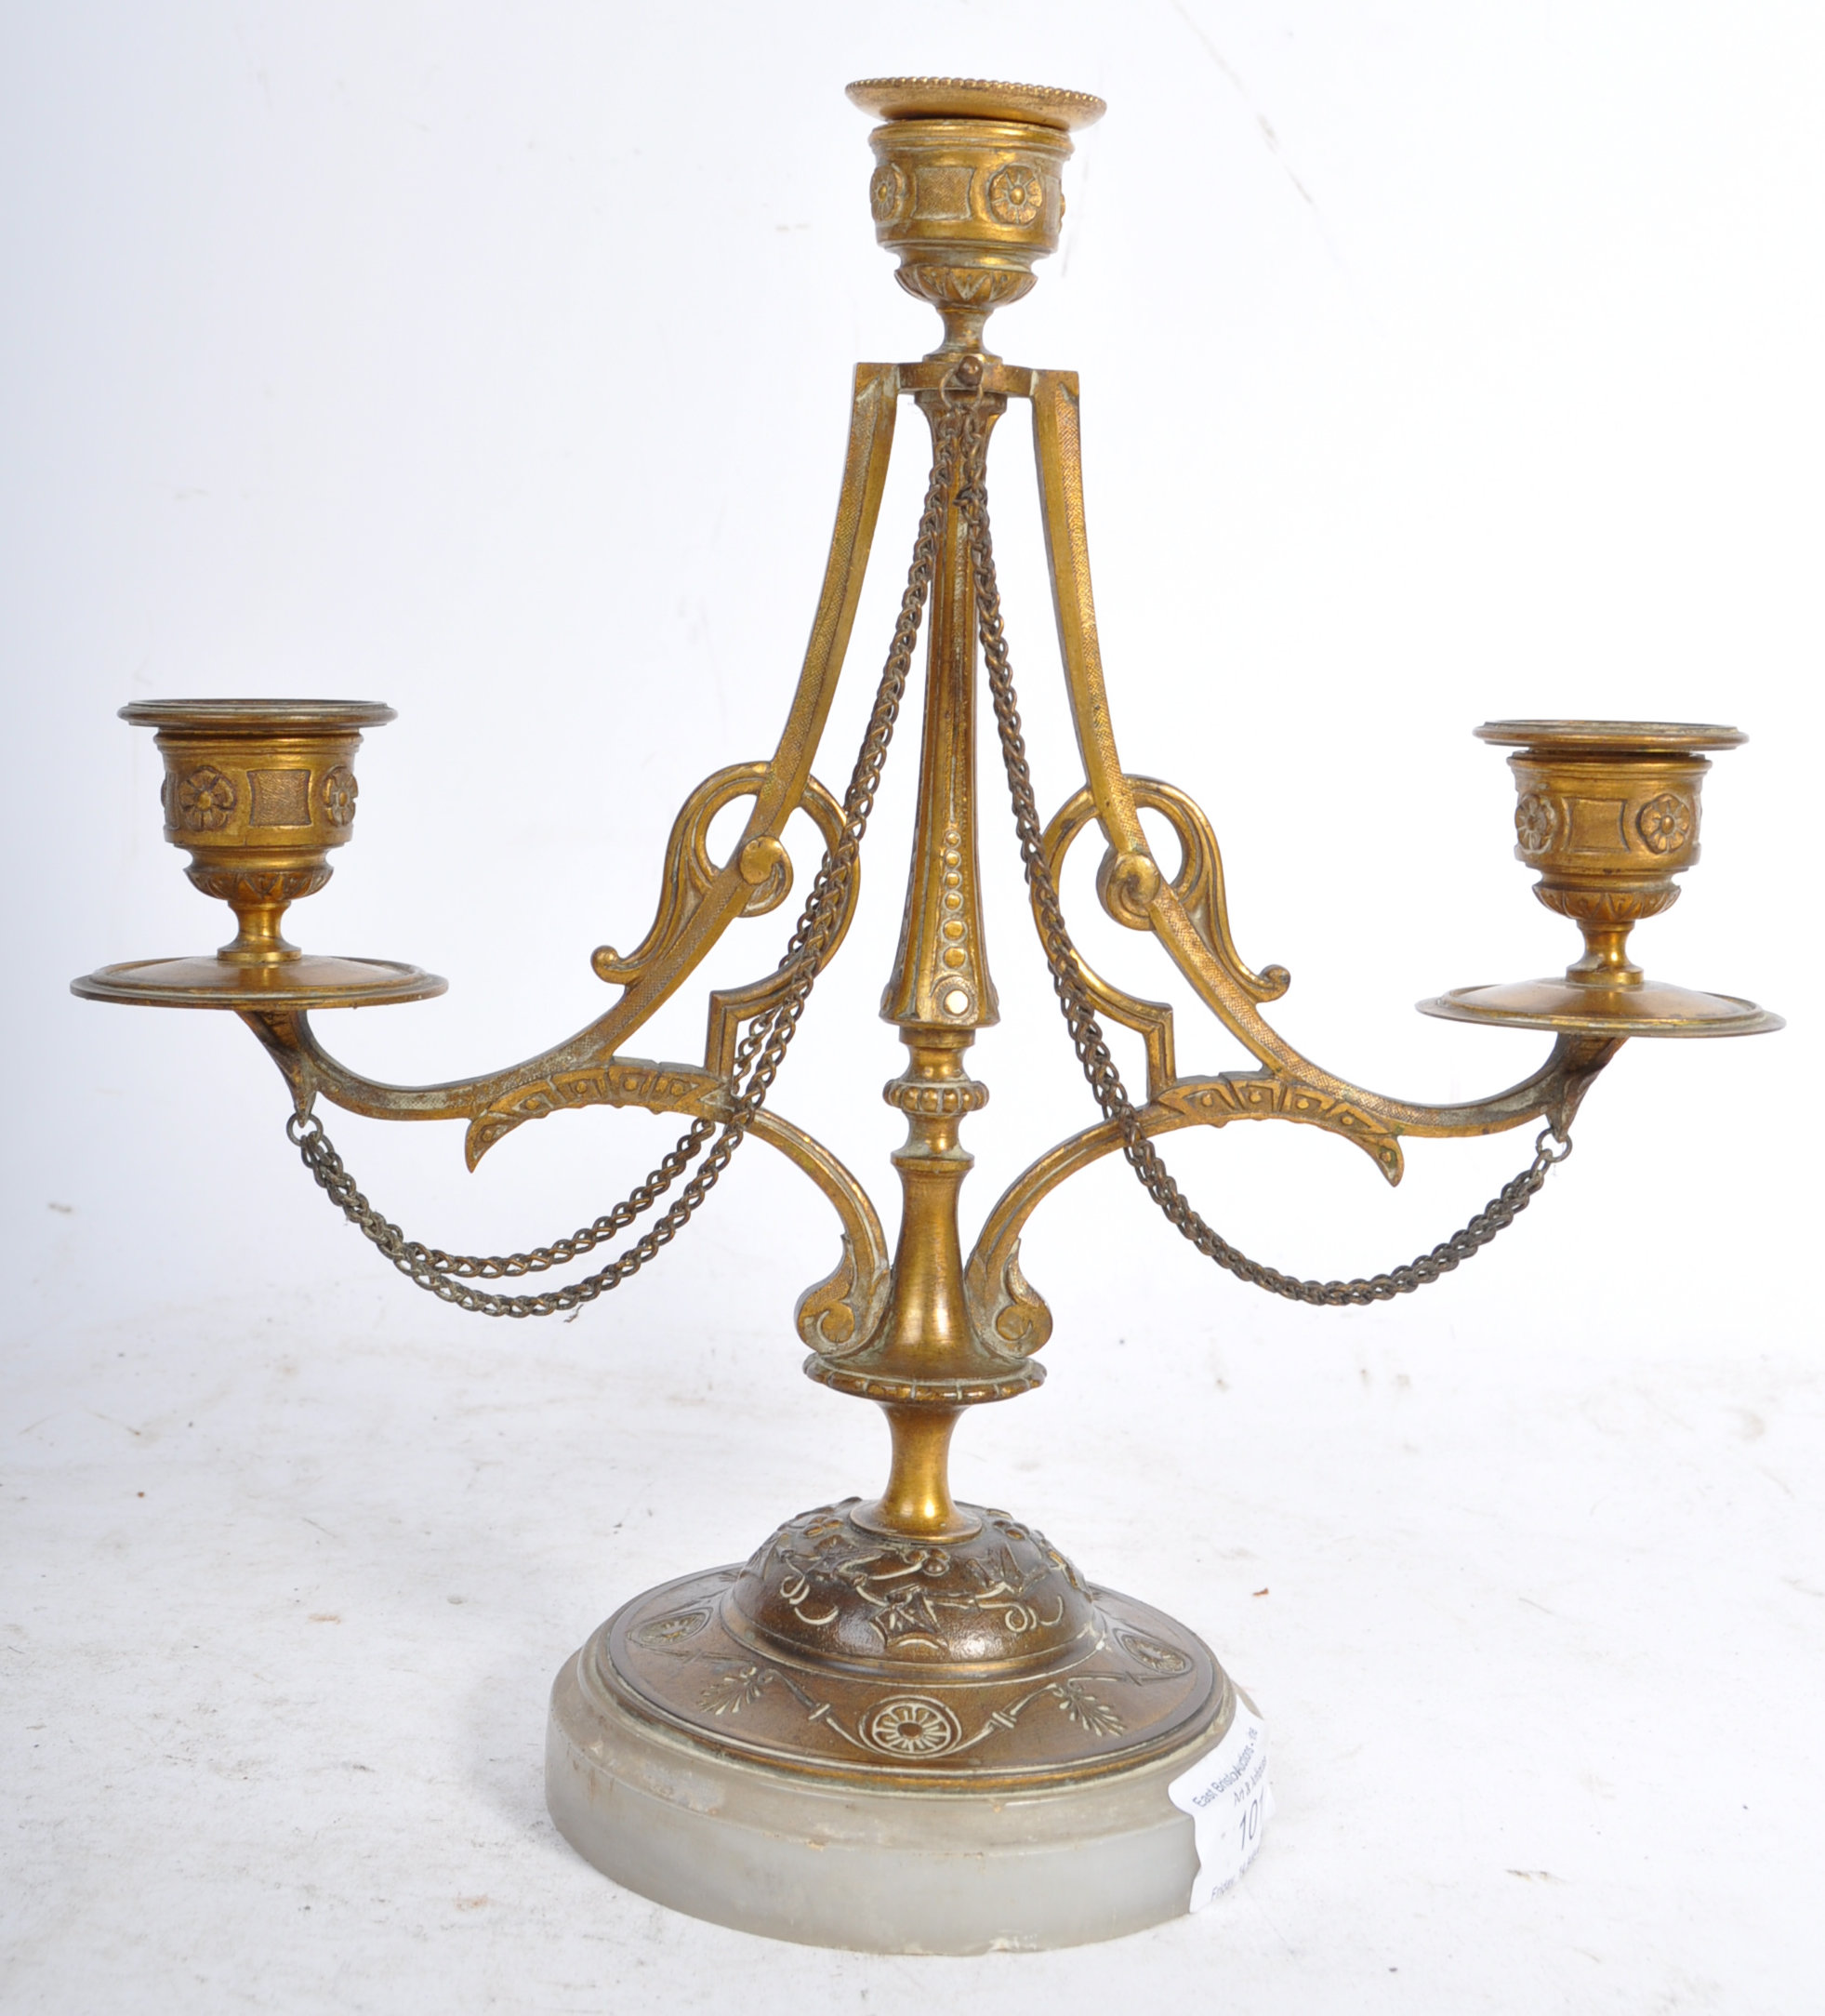 PAIR OF 19TH CENTURY BRONZE AND MARBLE CANDLESTICKS - Image 3 of 8